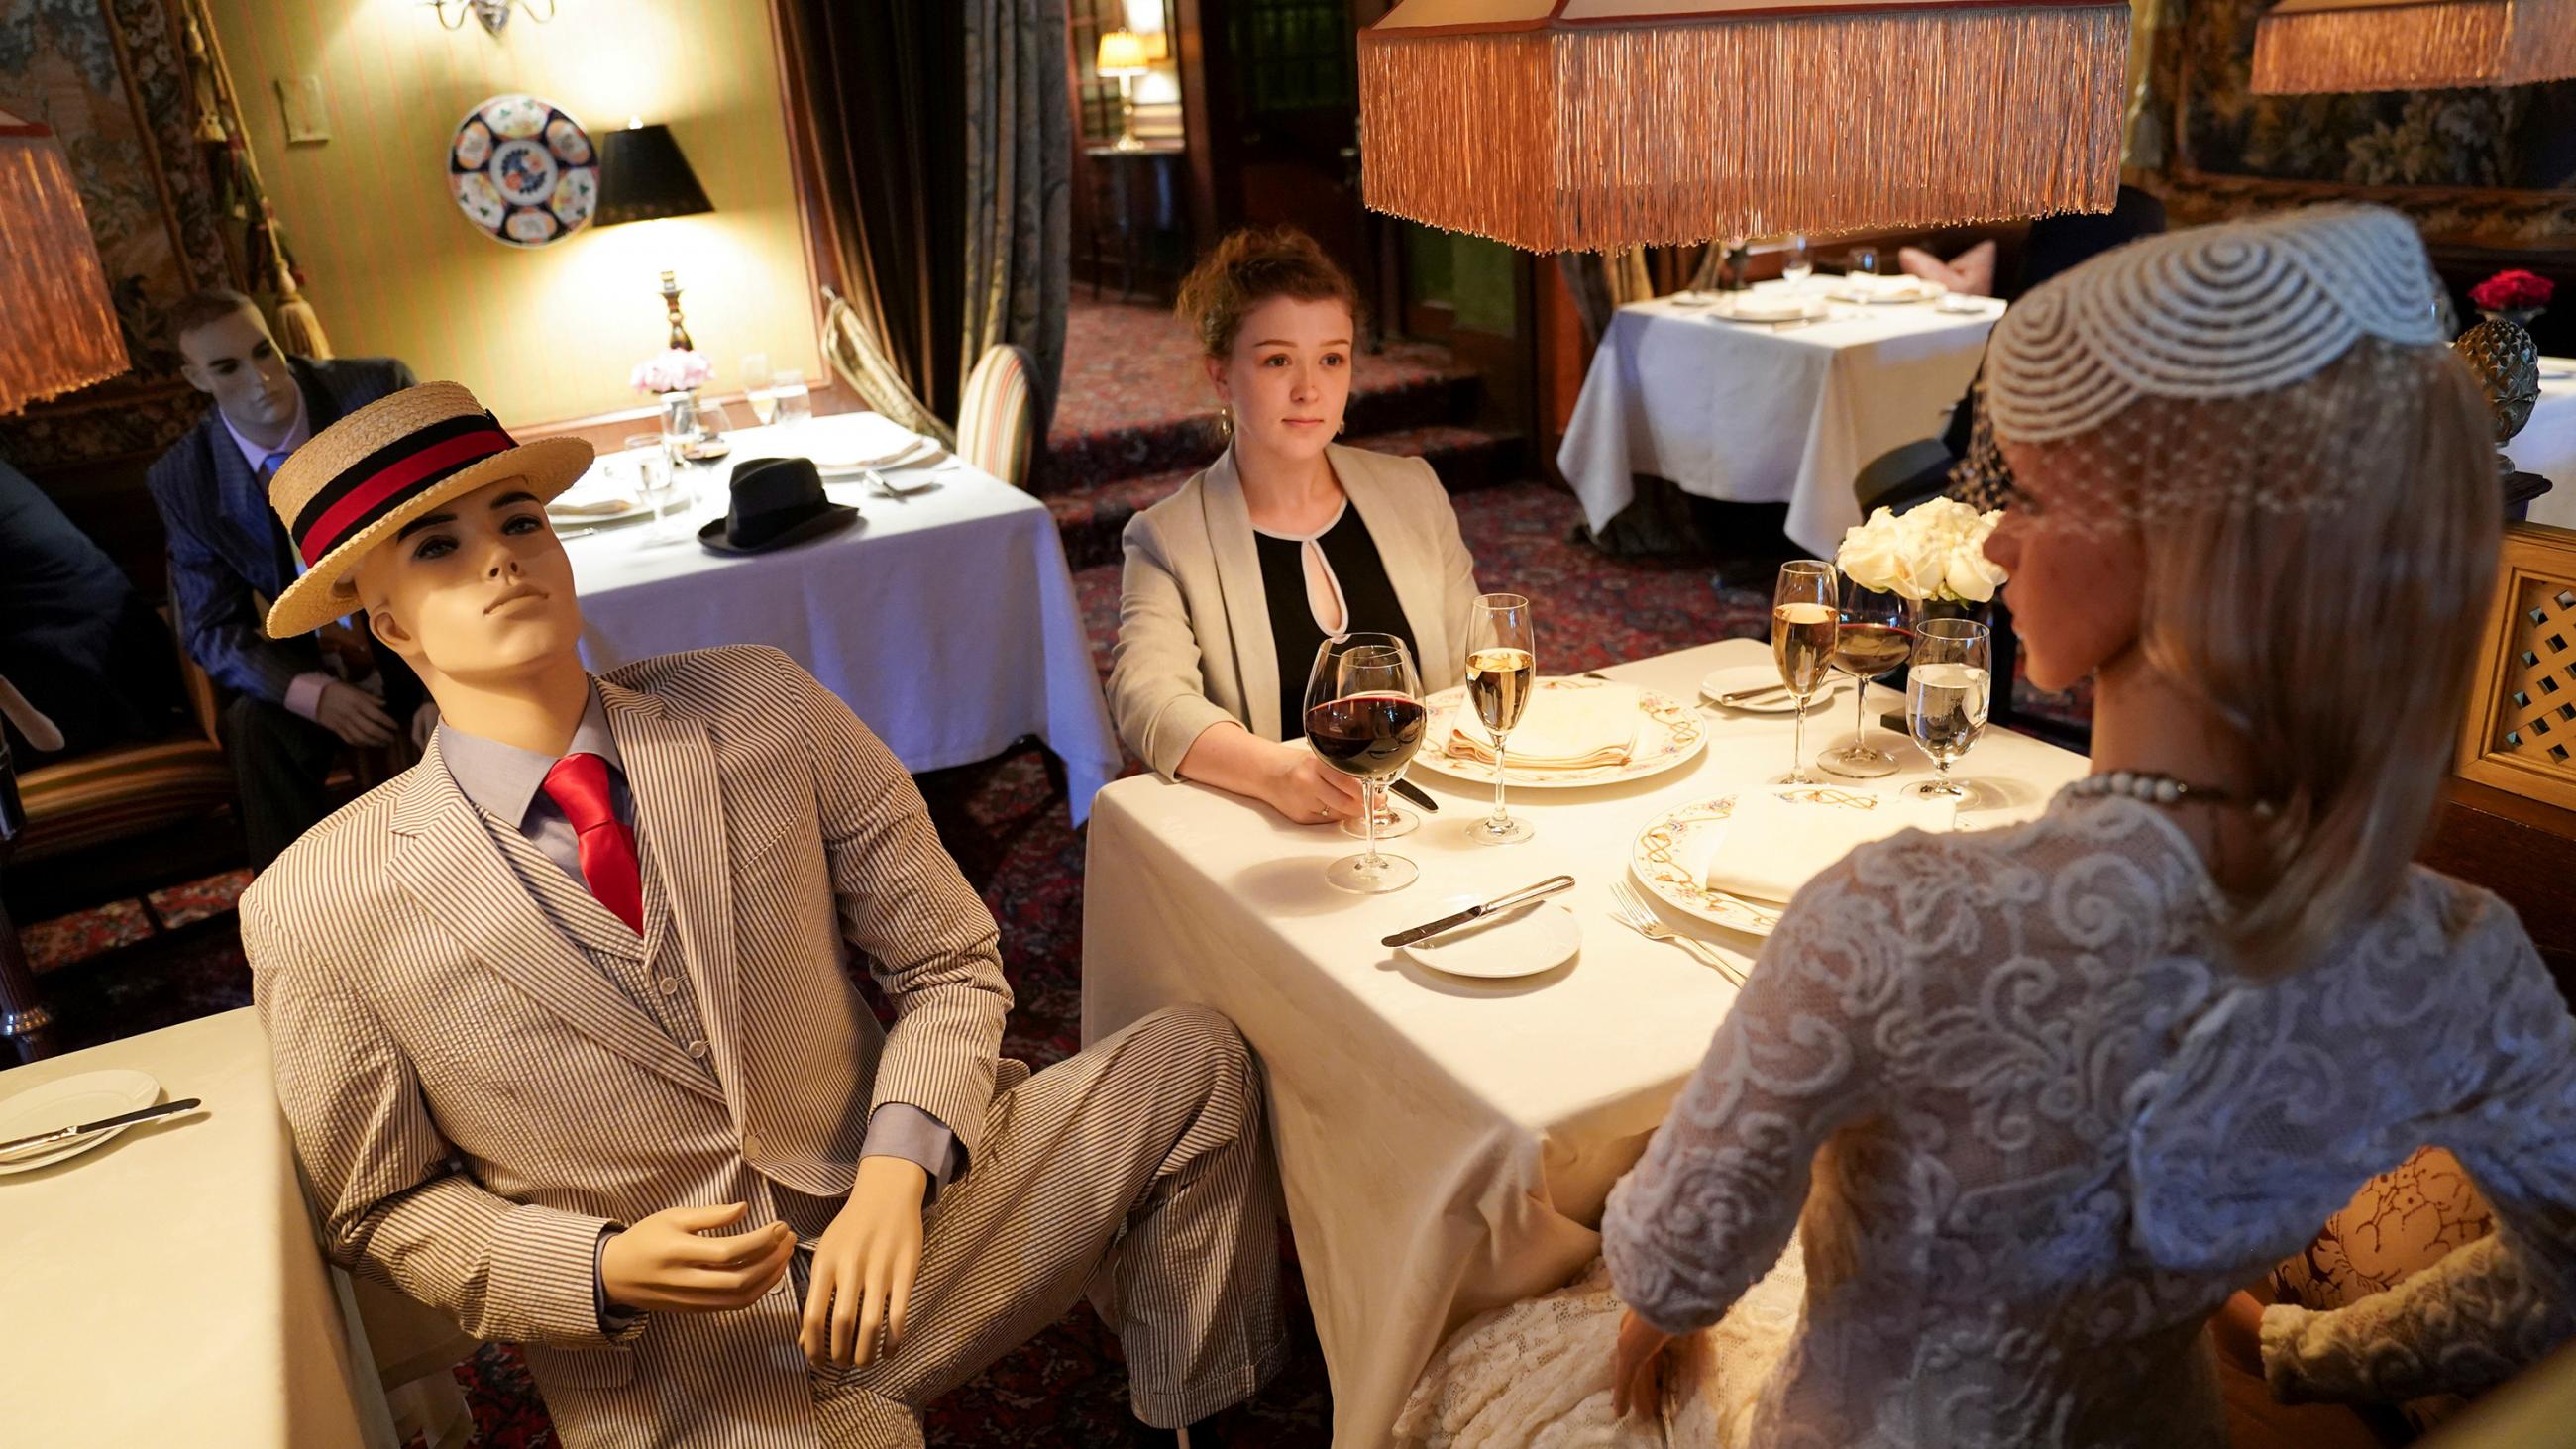 The photo shows a woman at a table with mannekins. 